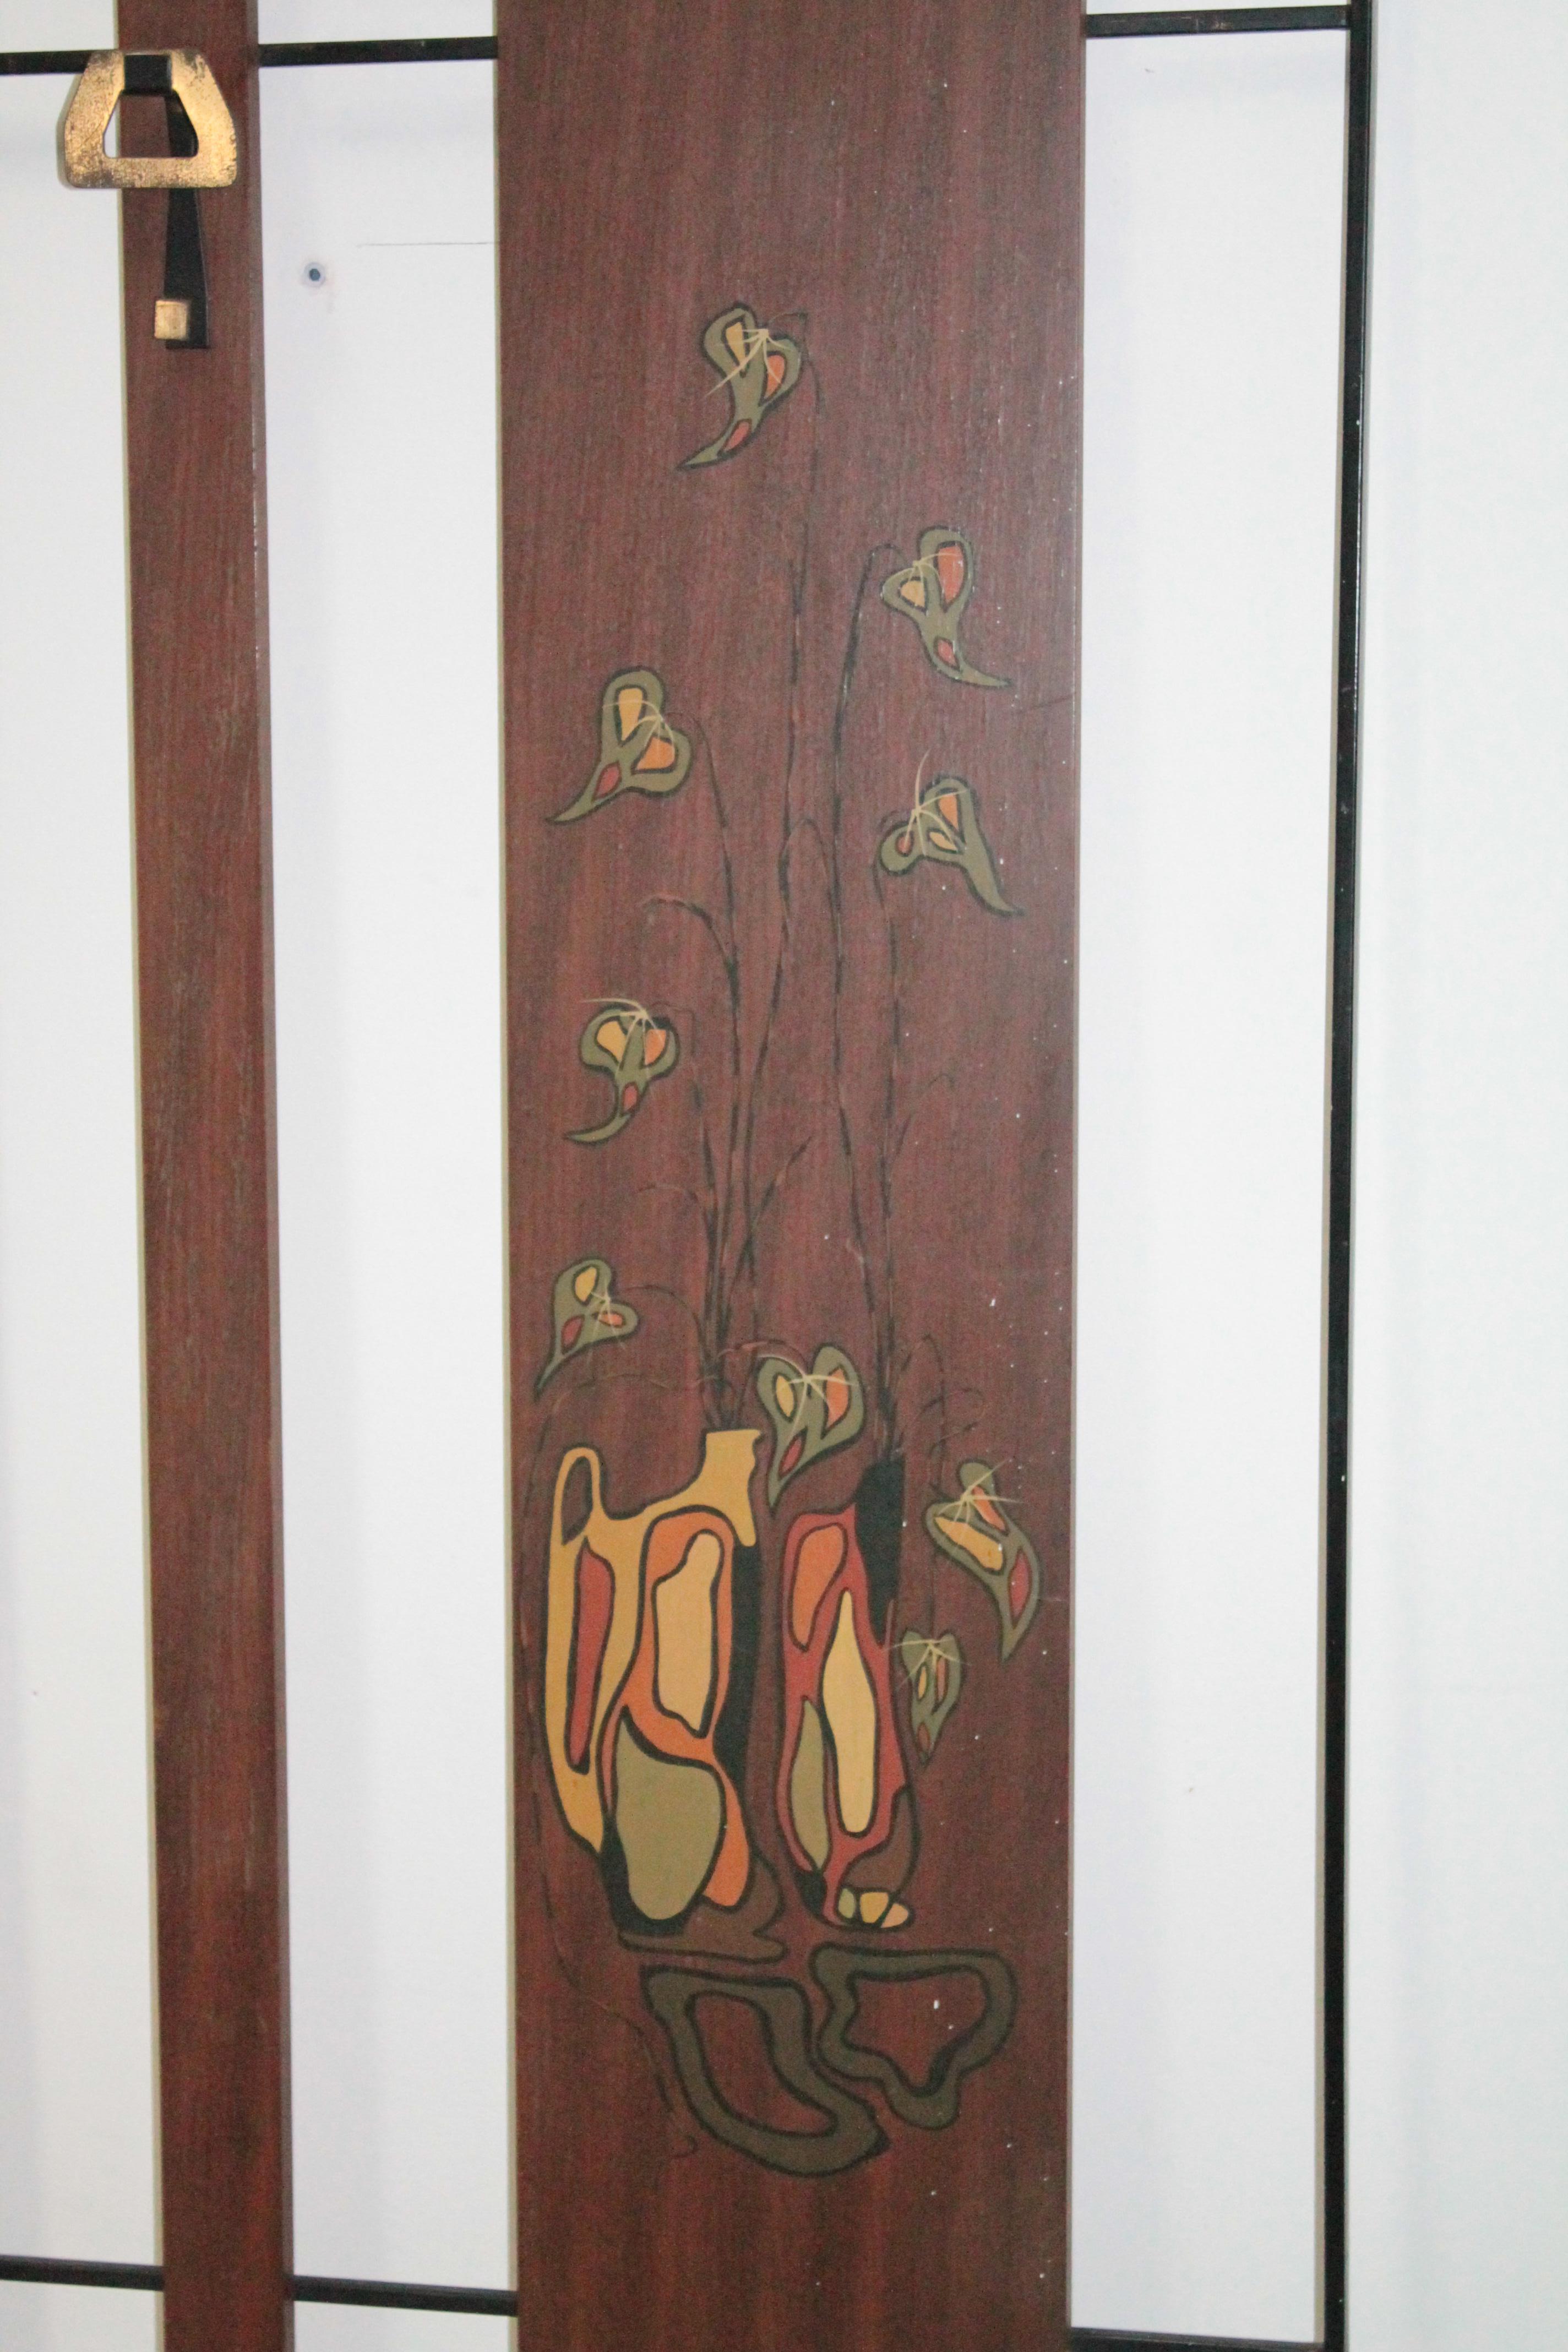 Italian Midcentury Wall Coat Hanger 1960s Campo e Graffi Style In Good Condition For Sale In Palermo, Palermo